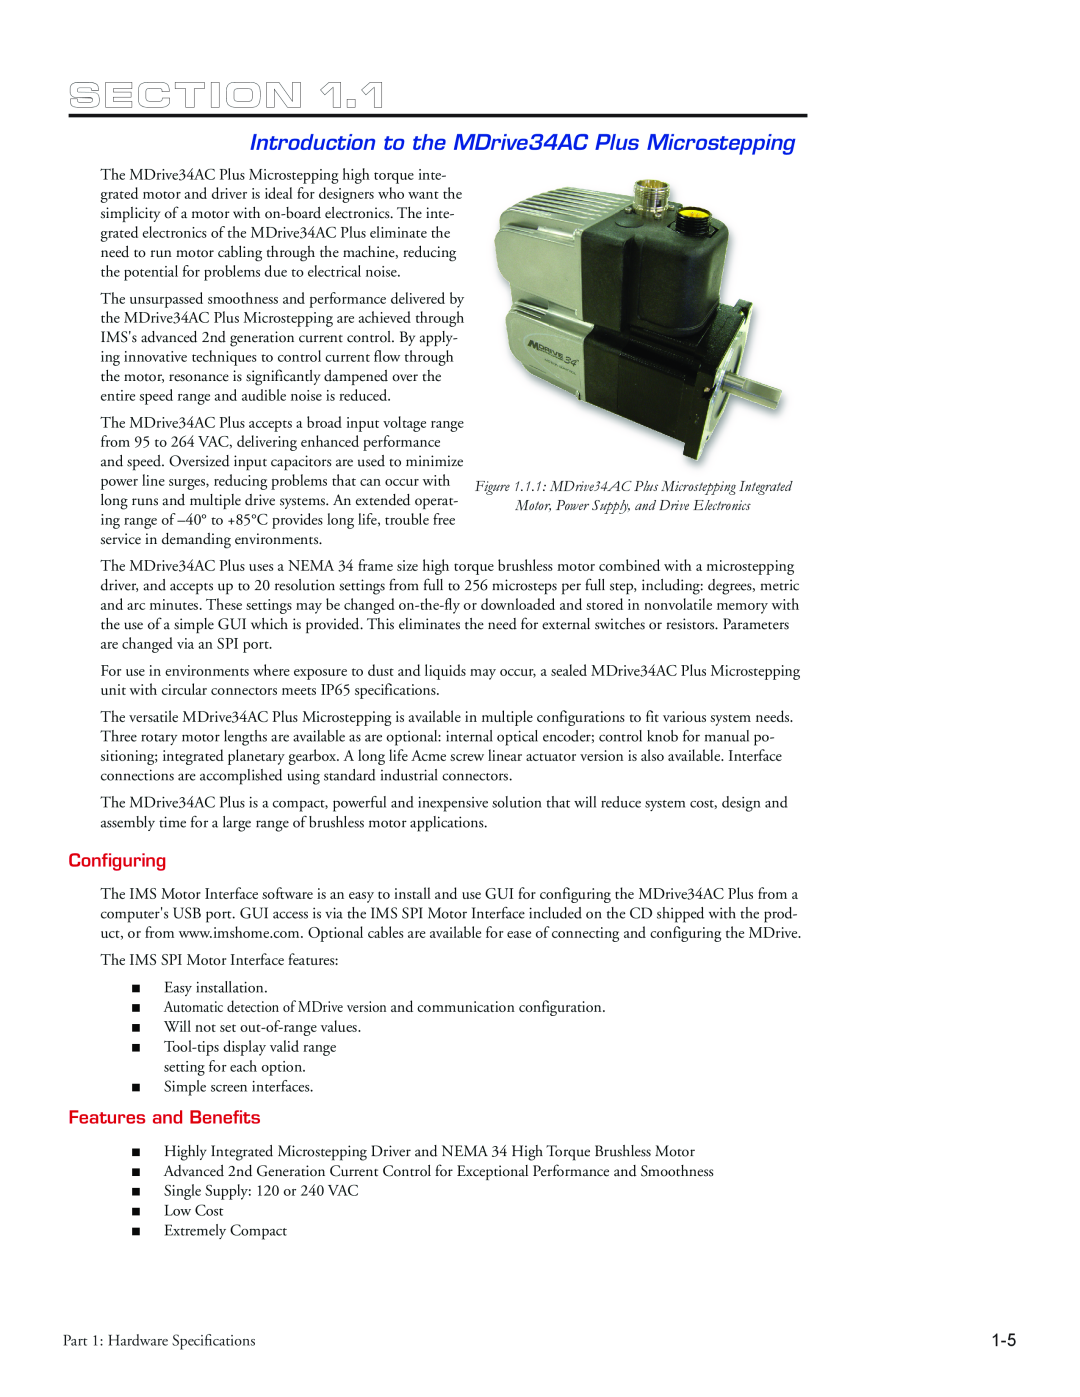 Intelligent Motion Systems manual Section, Introduction to the MDrive34AC Plus Microstepping, Configuring 